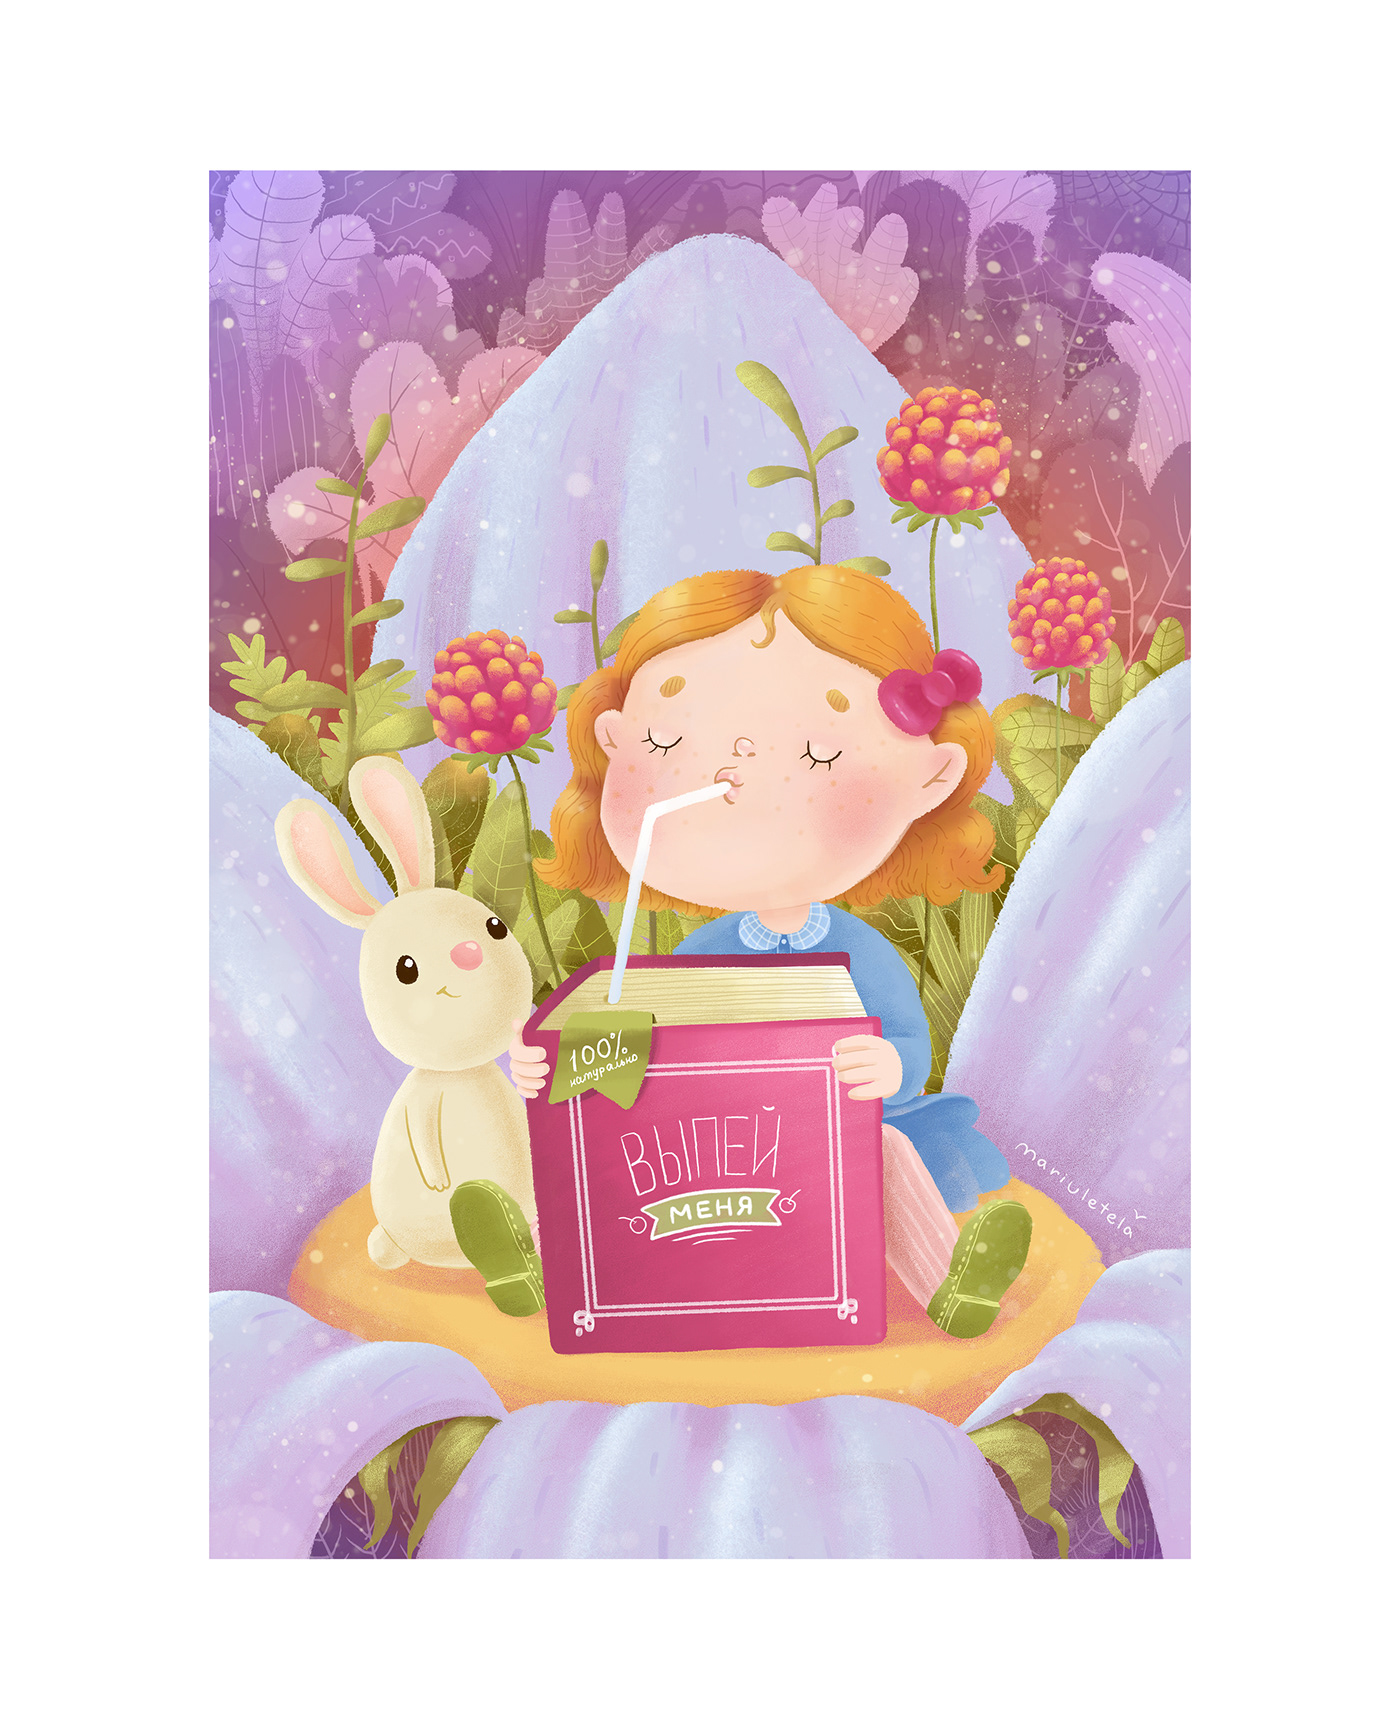 Berrywaterfest berrywater ChildrenIllustration children book festival bunny floral poster